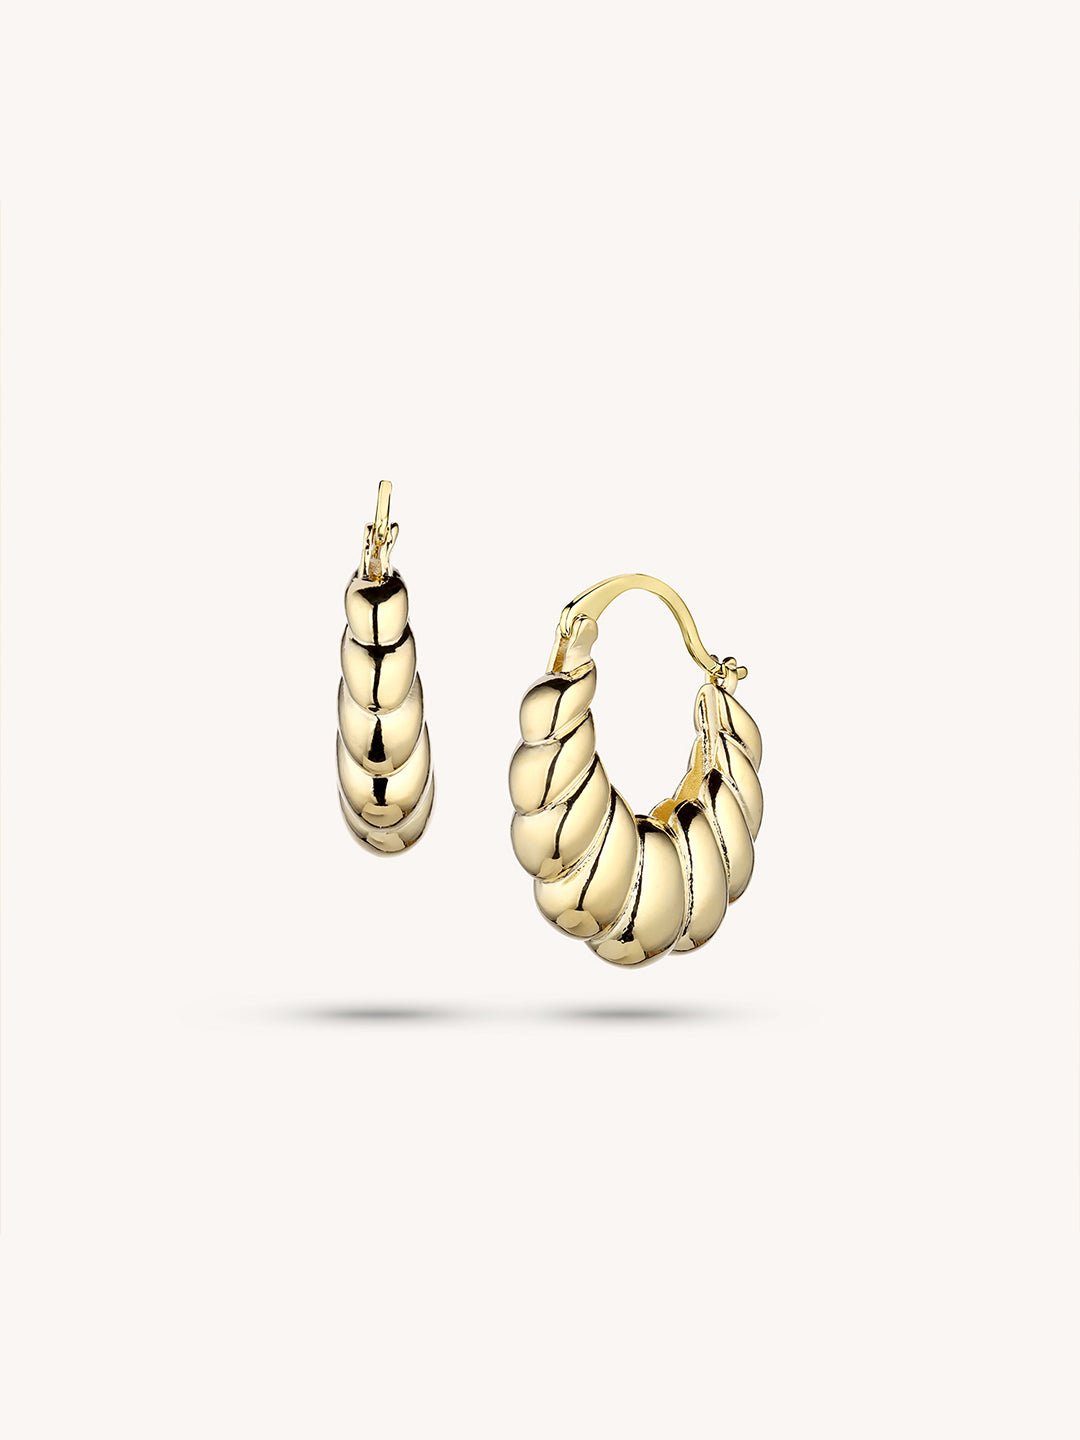 Gold Plated Classy Croissant Earrings - Revermejewelry